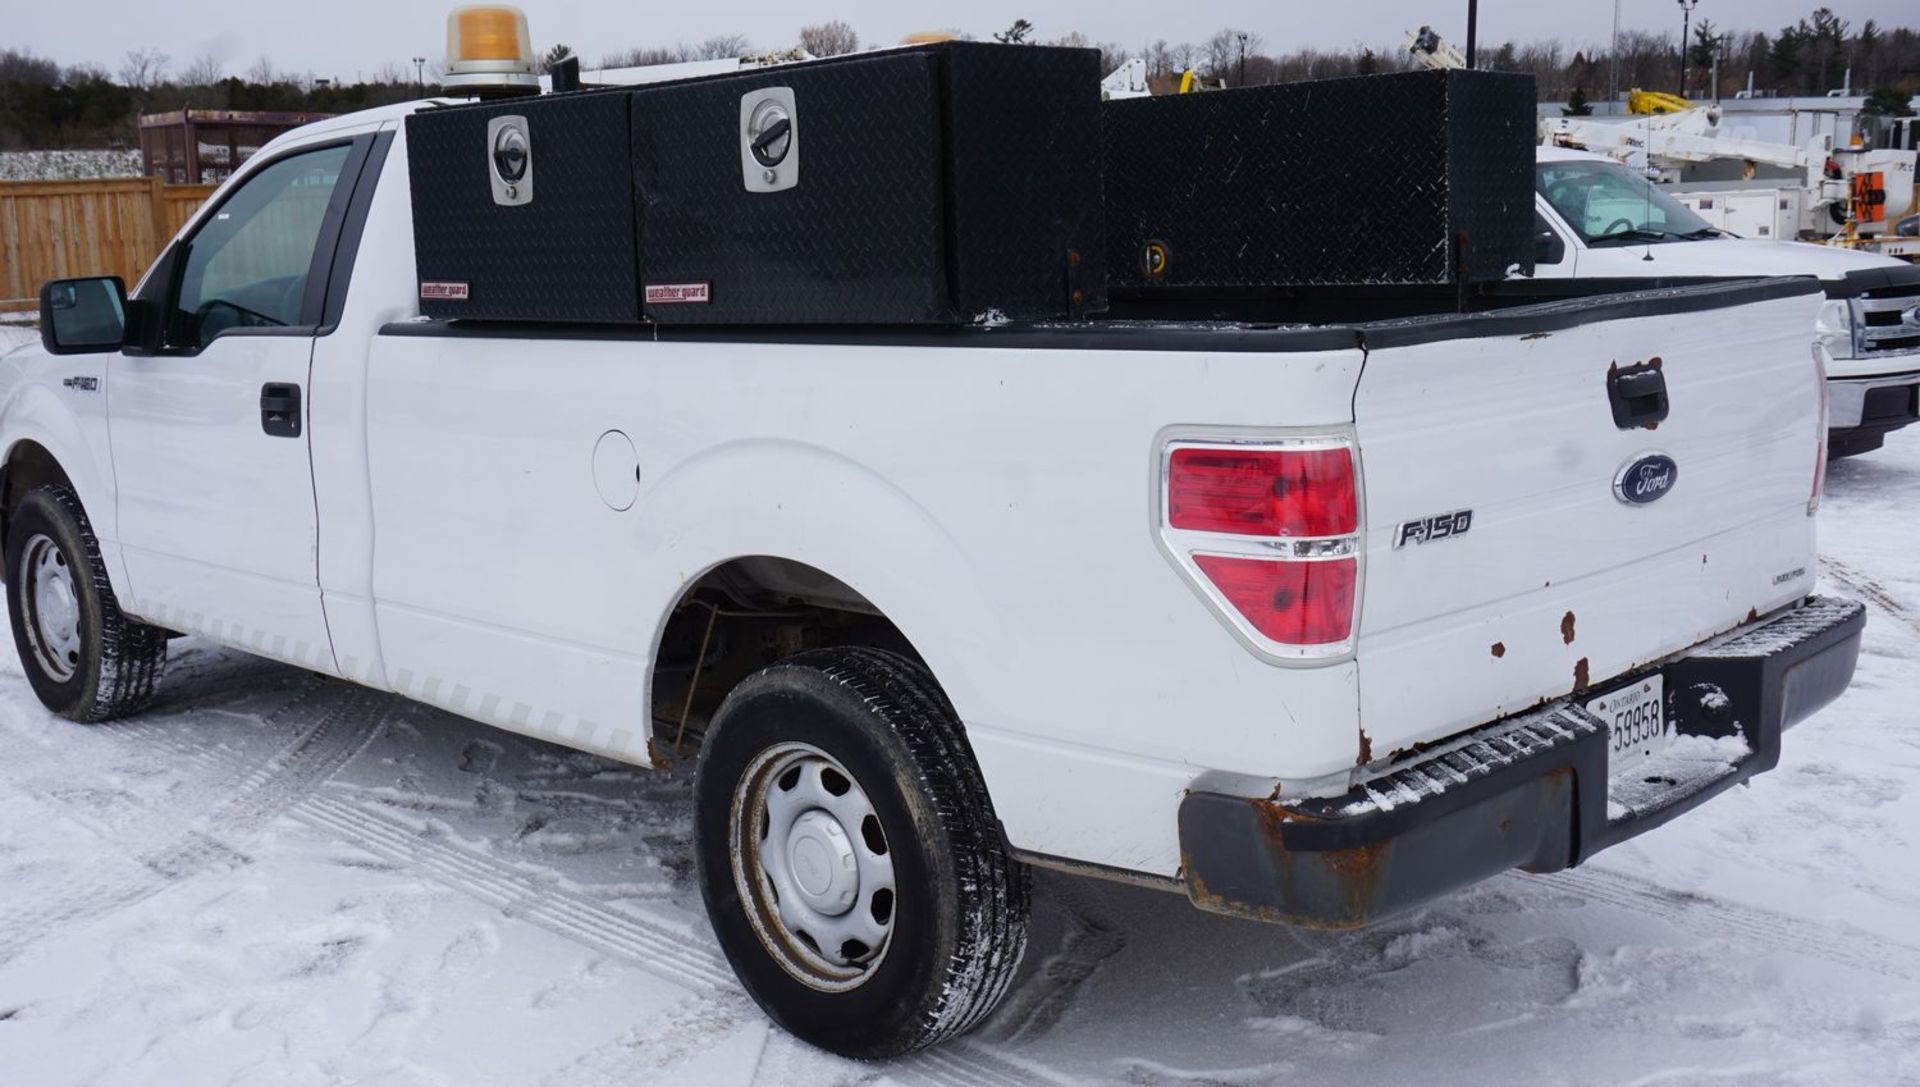 2014 FORD F150XL REG CAB 4X2 PICKUP W/ 5.0L V8 GAS ENGINE C/W (2) WEATHER GUARD HI-SIDE TOOL BOXES, - Image 7 of 10